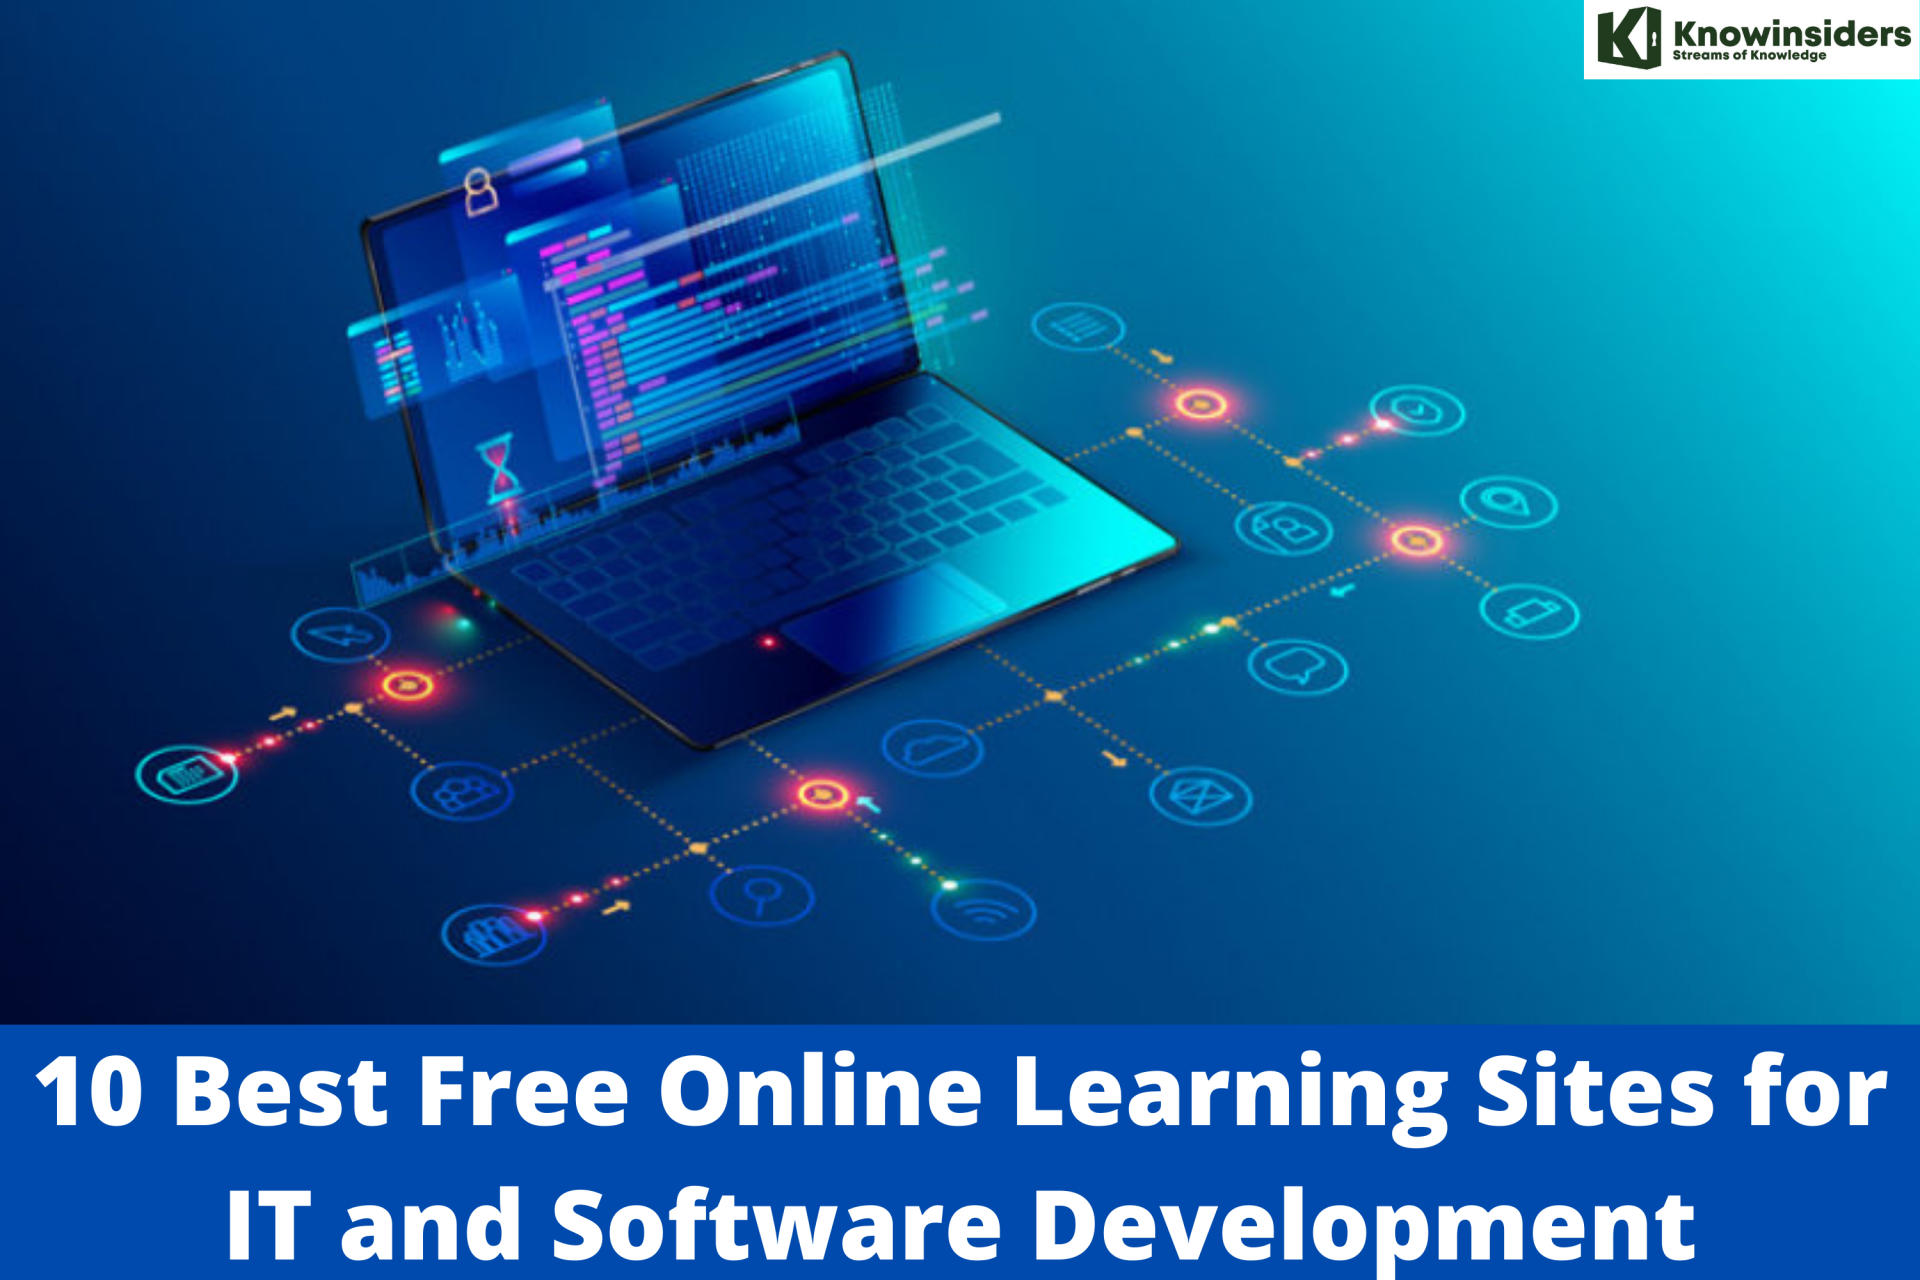 10 Best Free Online Learning Sites for IT and Software Development